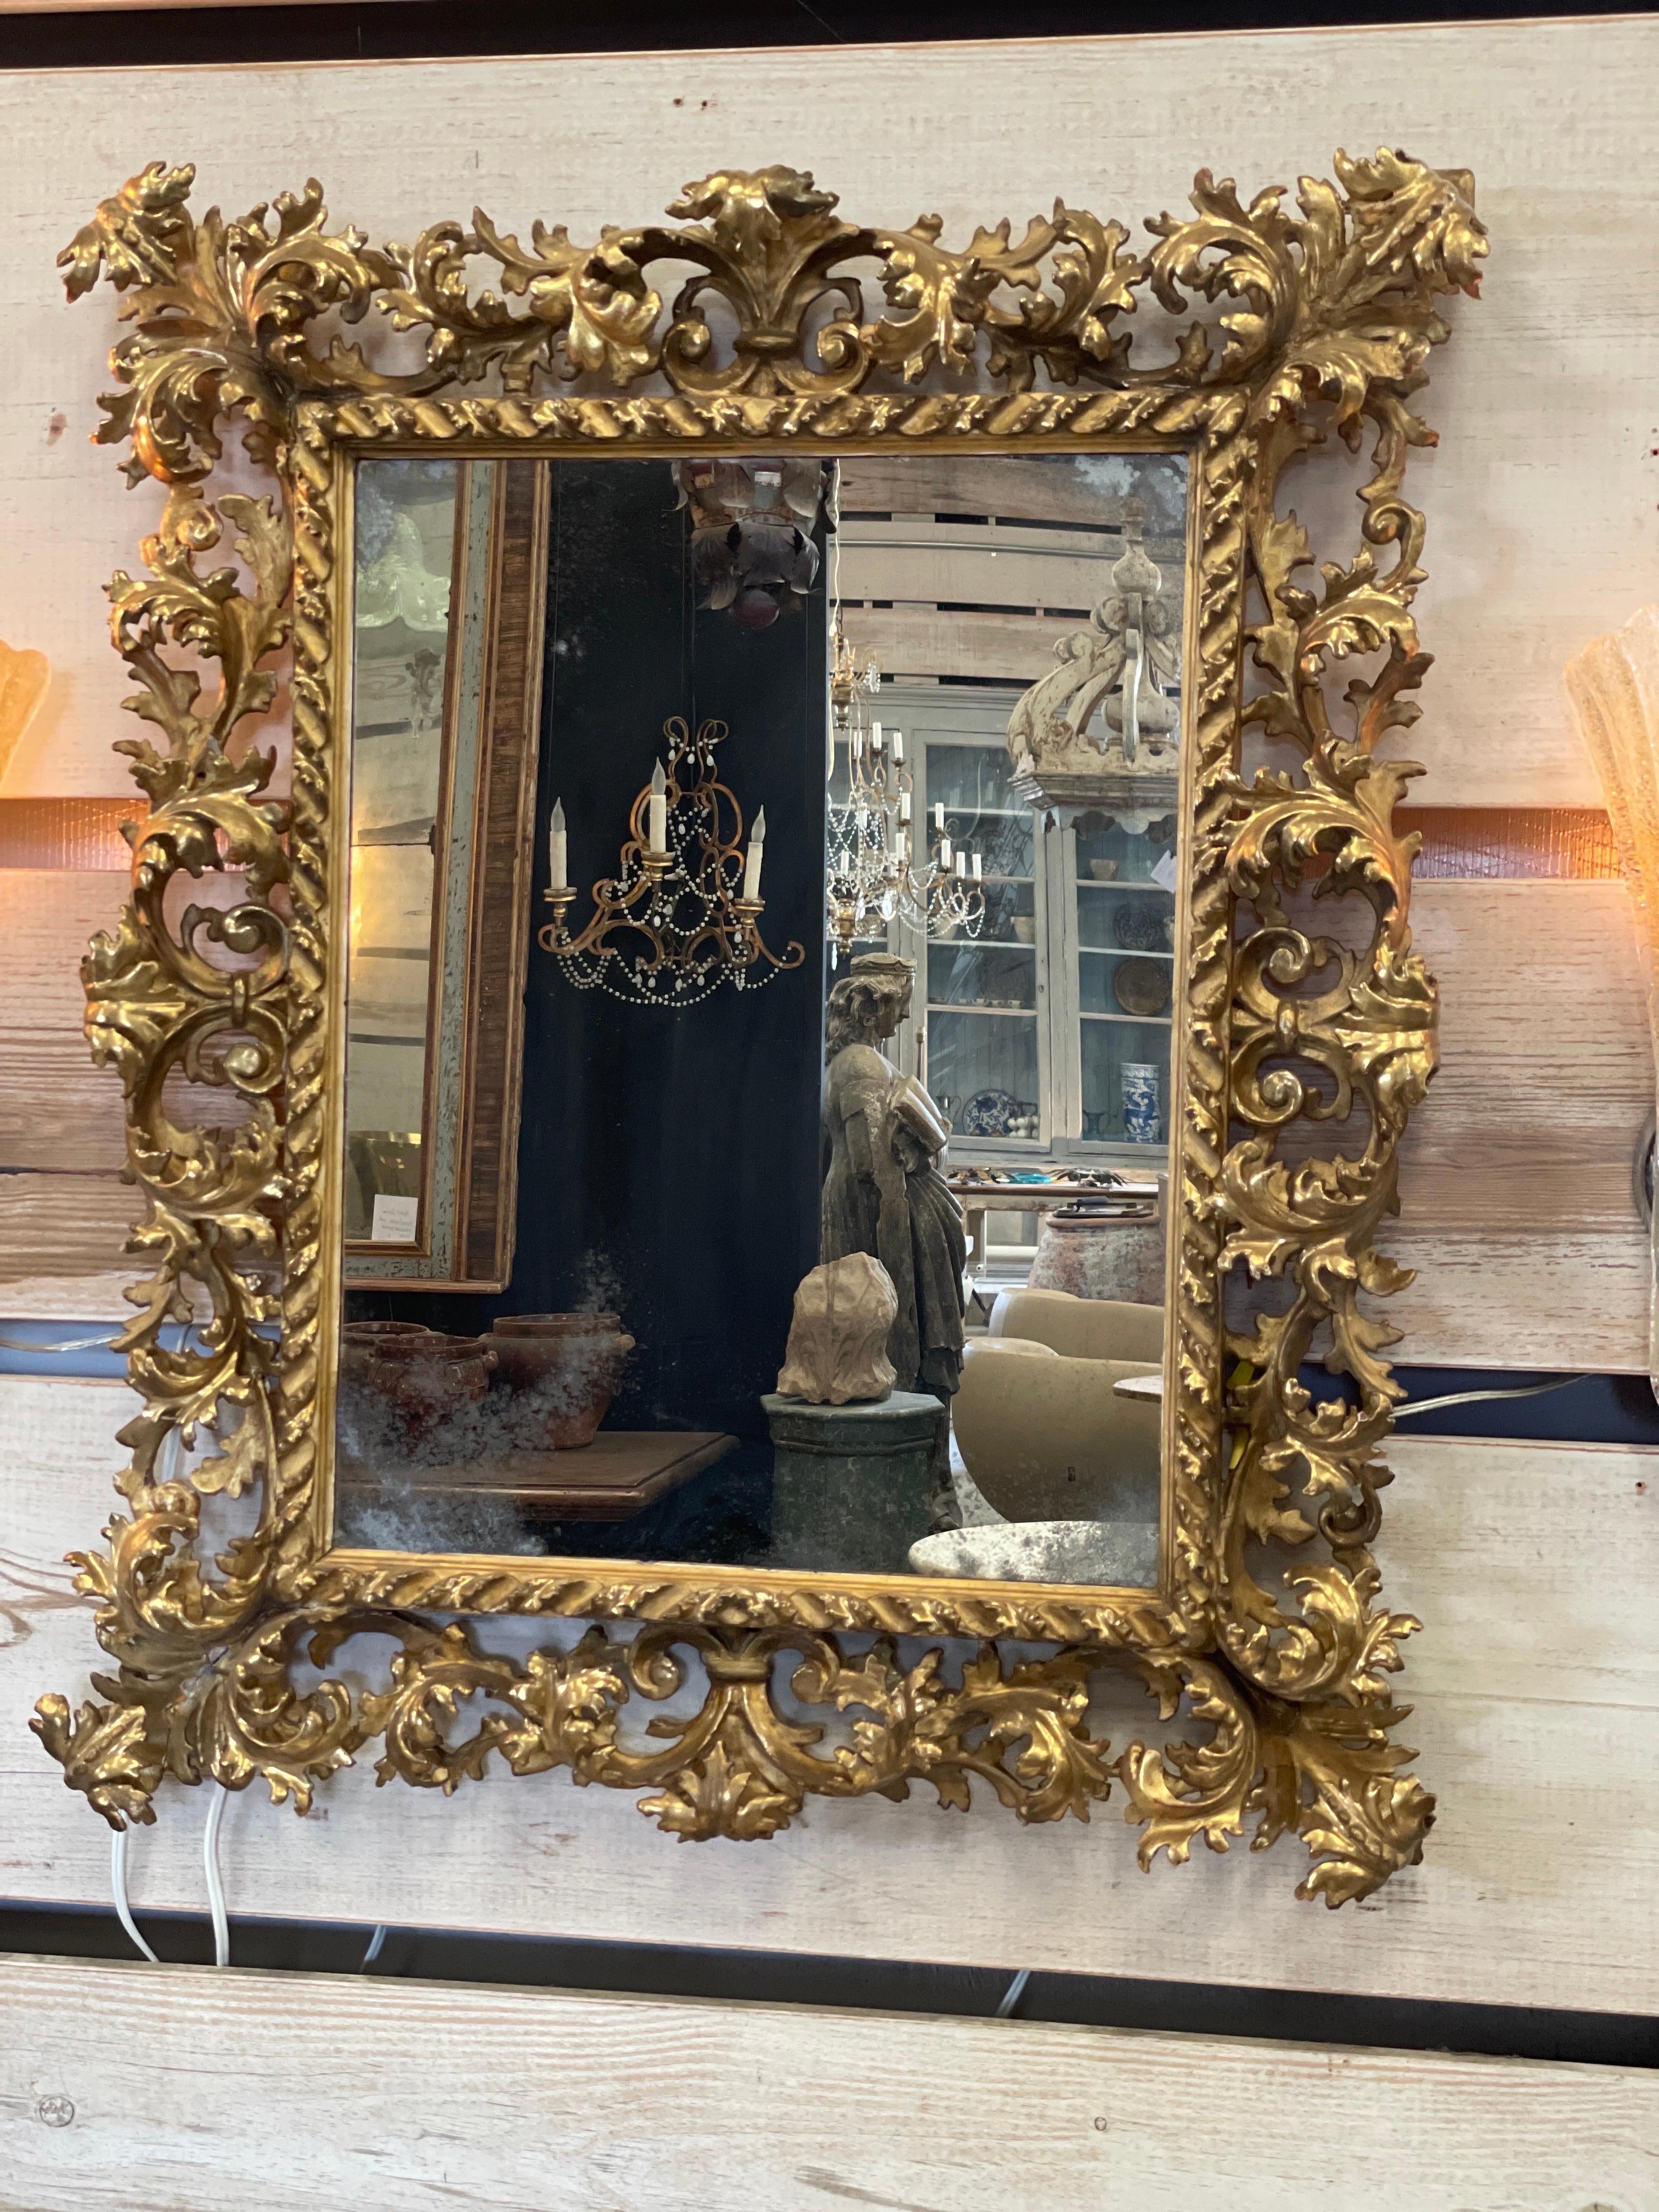 Elegant hand carved masterpiece of a mirror from the 18th century Italy.  It’s a great size about a medium chest or powder bathroom.
The glass has been changed at a later date.
31” w x 37” t x 4”d